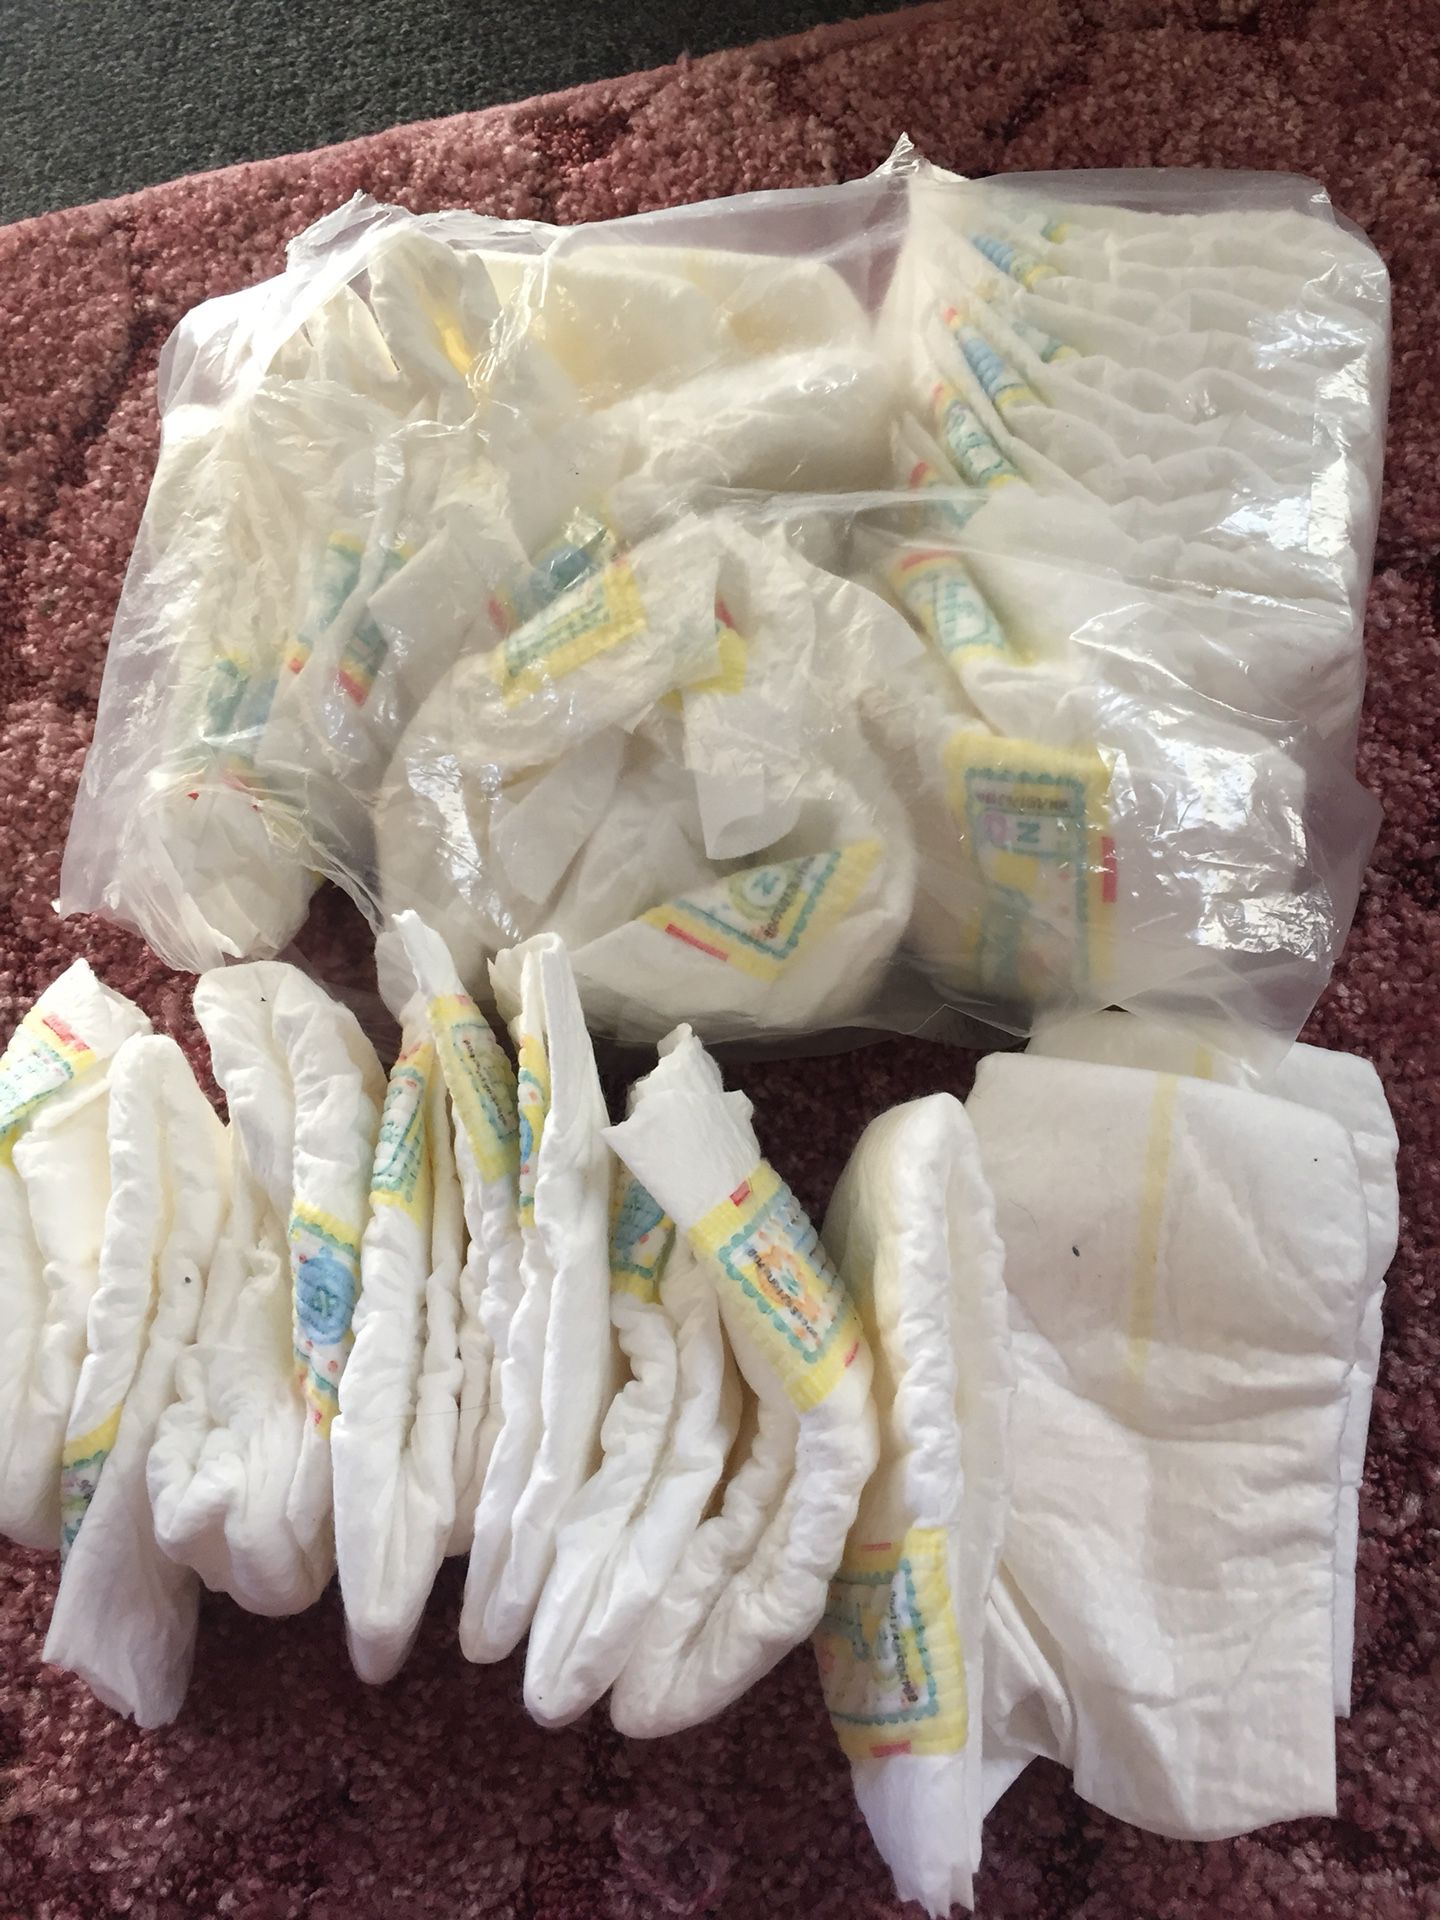 Newborn size diapers. Almost a full bag